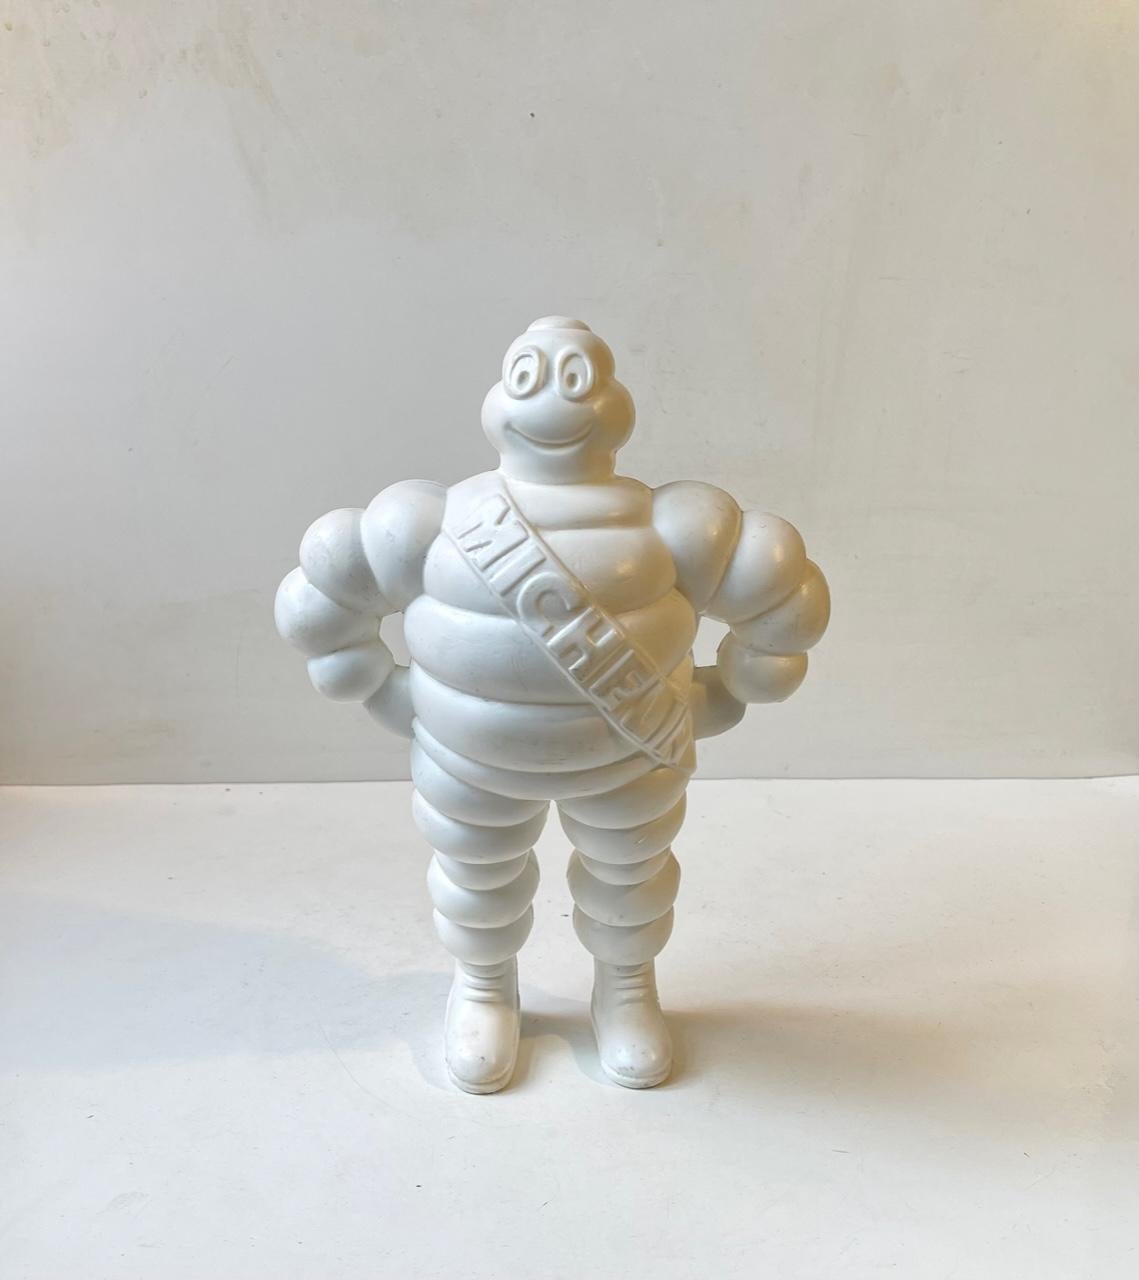 Standing original Bibemdum the Michelin mans initial name dating from the early 1980s. Made by Michelin in France for sign, truck or display purposes. Stamped to its feet: Made in France, Michelin C 1887. Measurements: H: 32 cm, W: 22 cm, Dept: 11